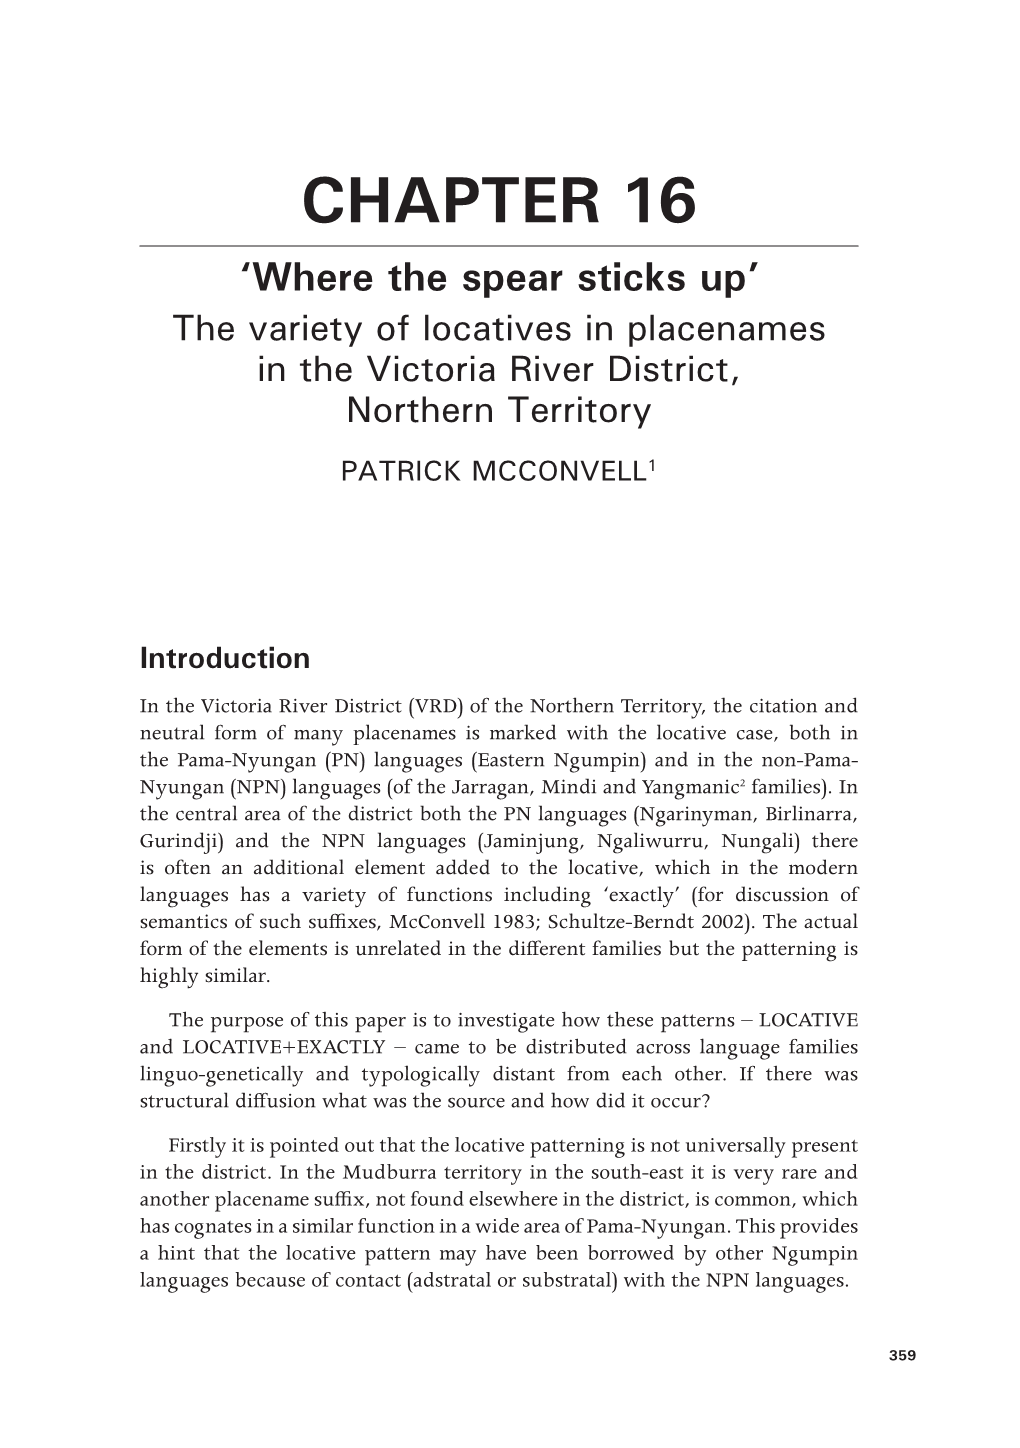 CHAPTER 16 ‘Where the Spear Sticks Up’ the Variety of Locatives in Placenames in the Victoria River District, Northern Territory PATRICK MCCONVELL1